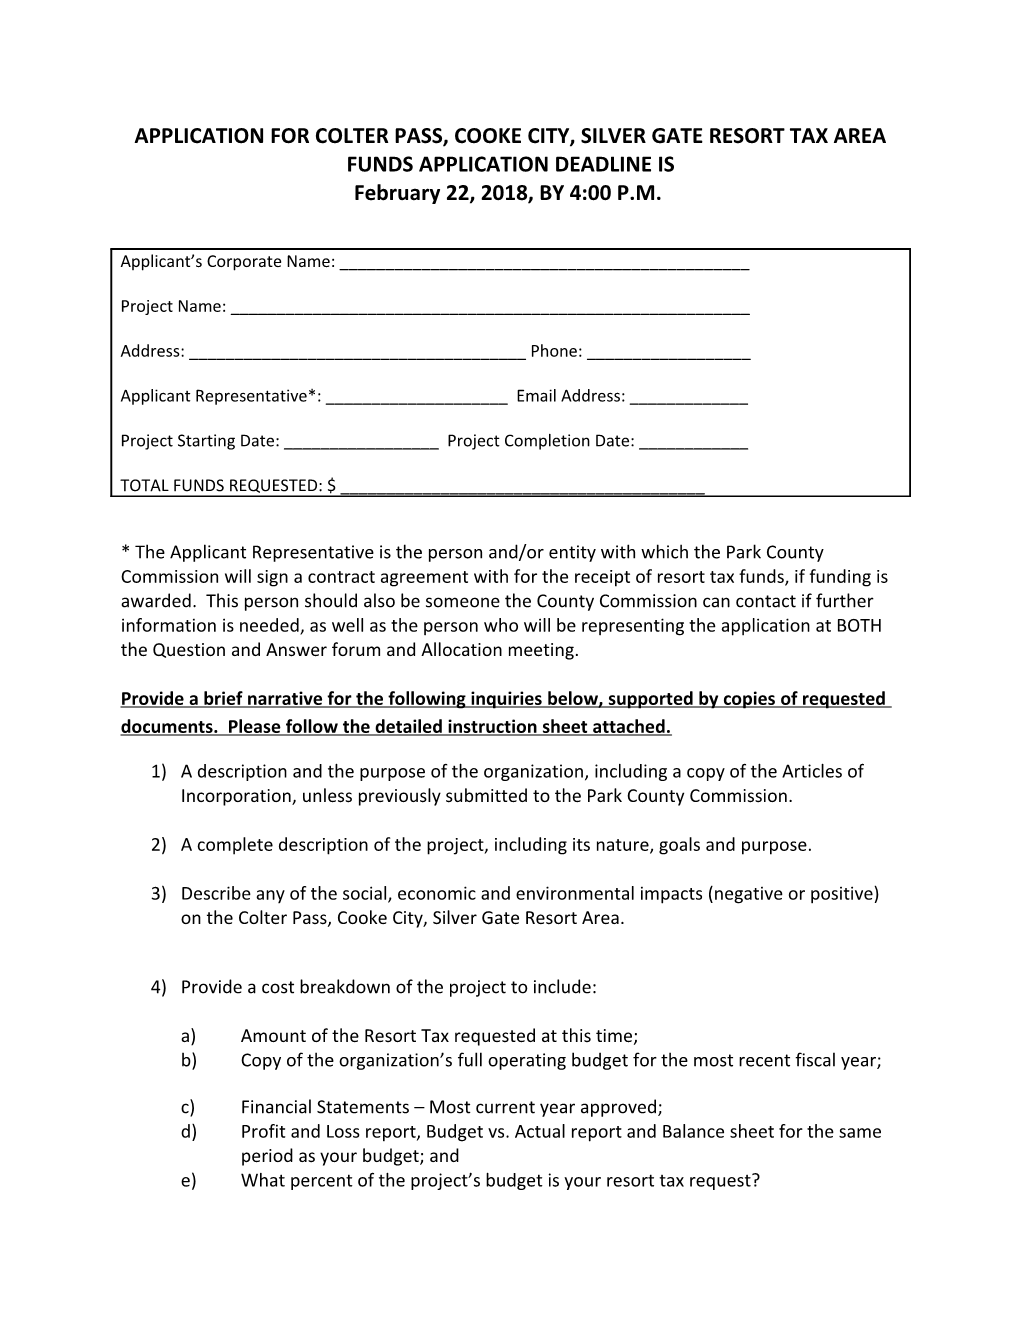 Application for Colter Pass, Cooke City, Silver Gate Resort Tax Area Funds Application